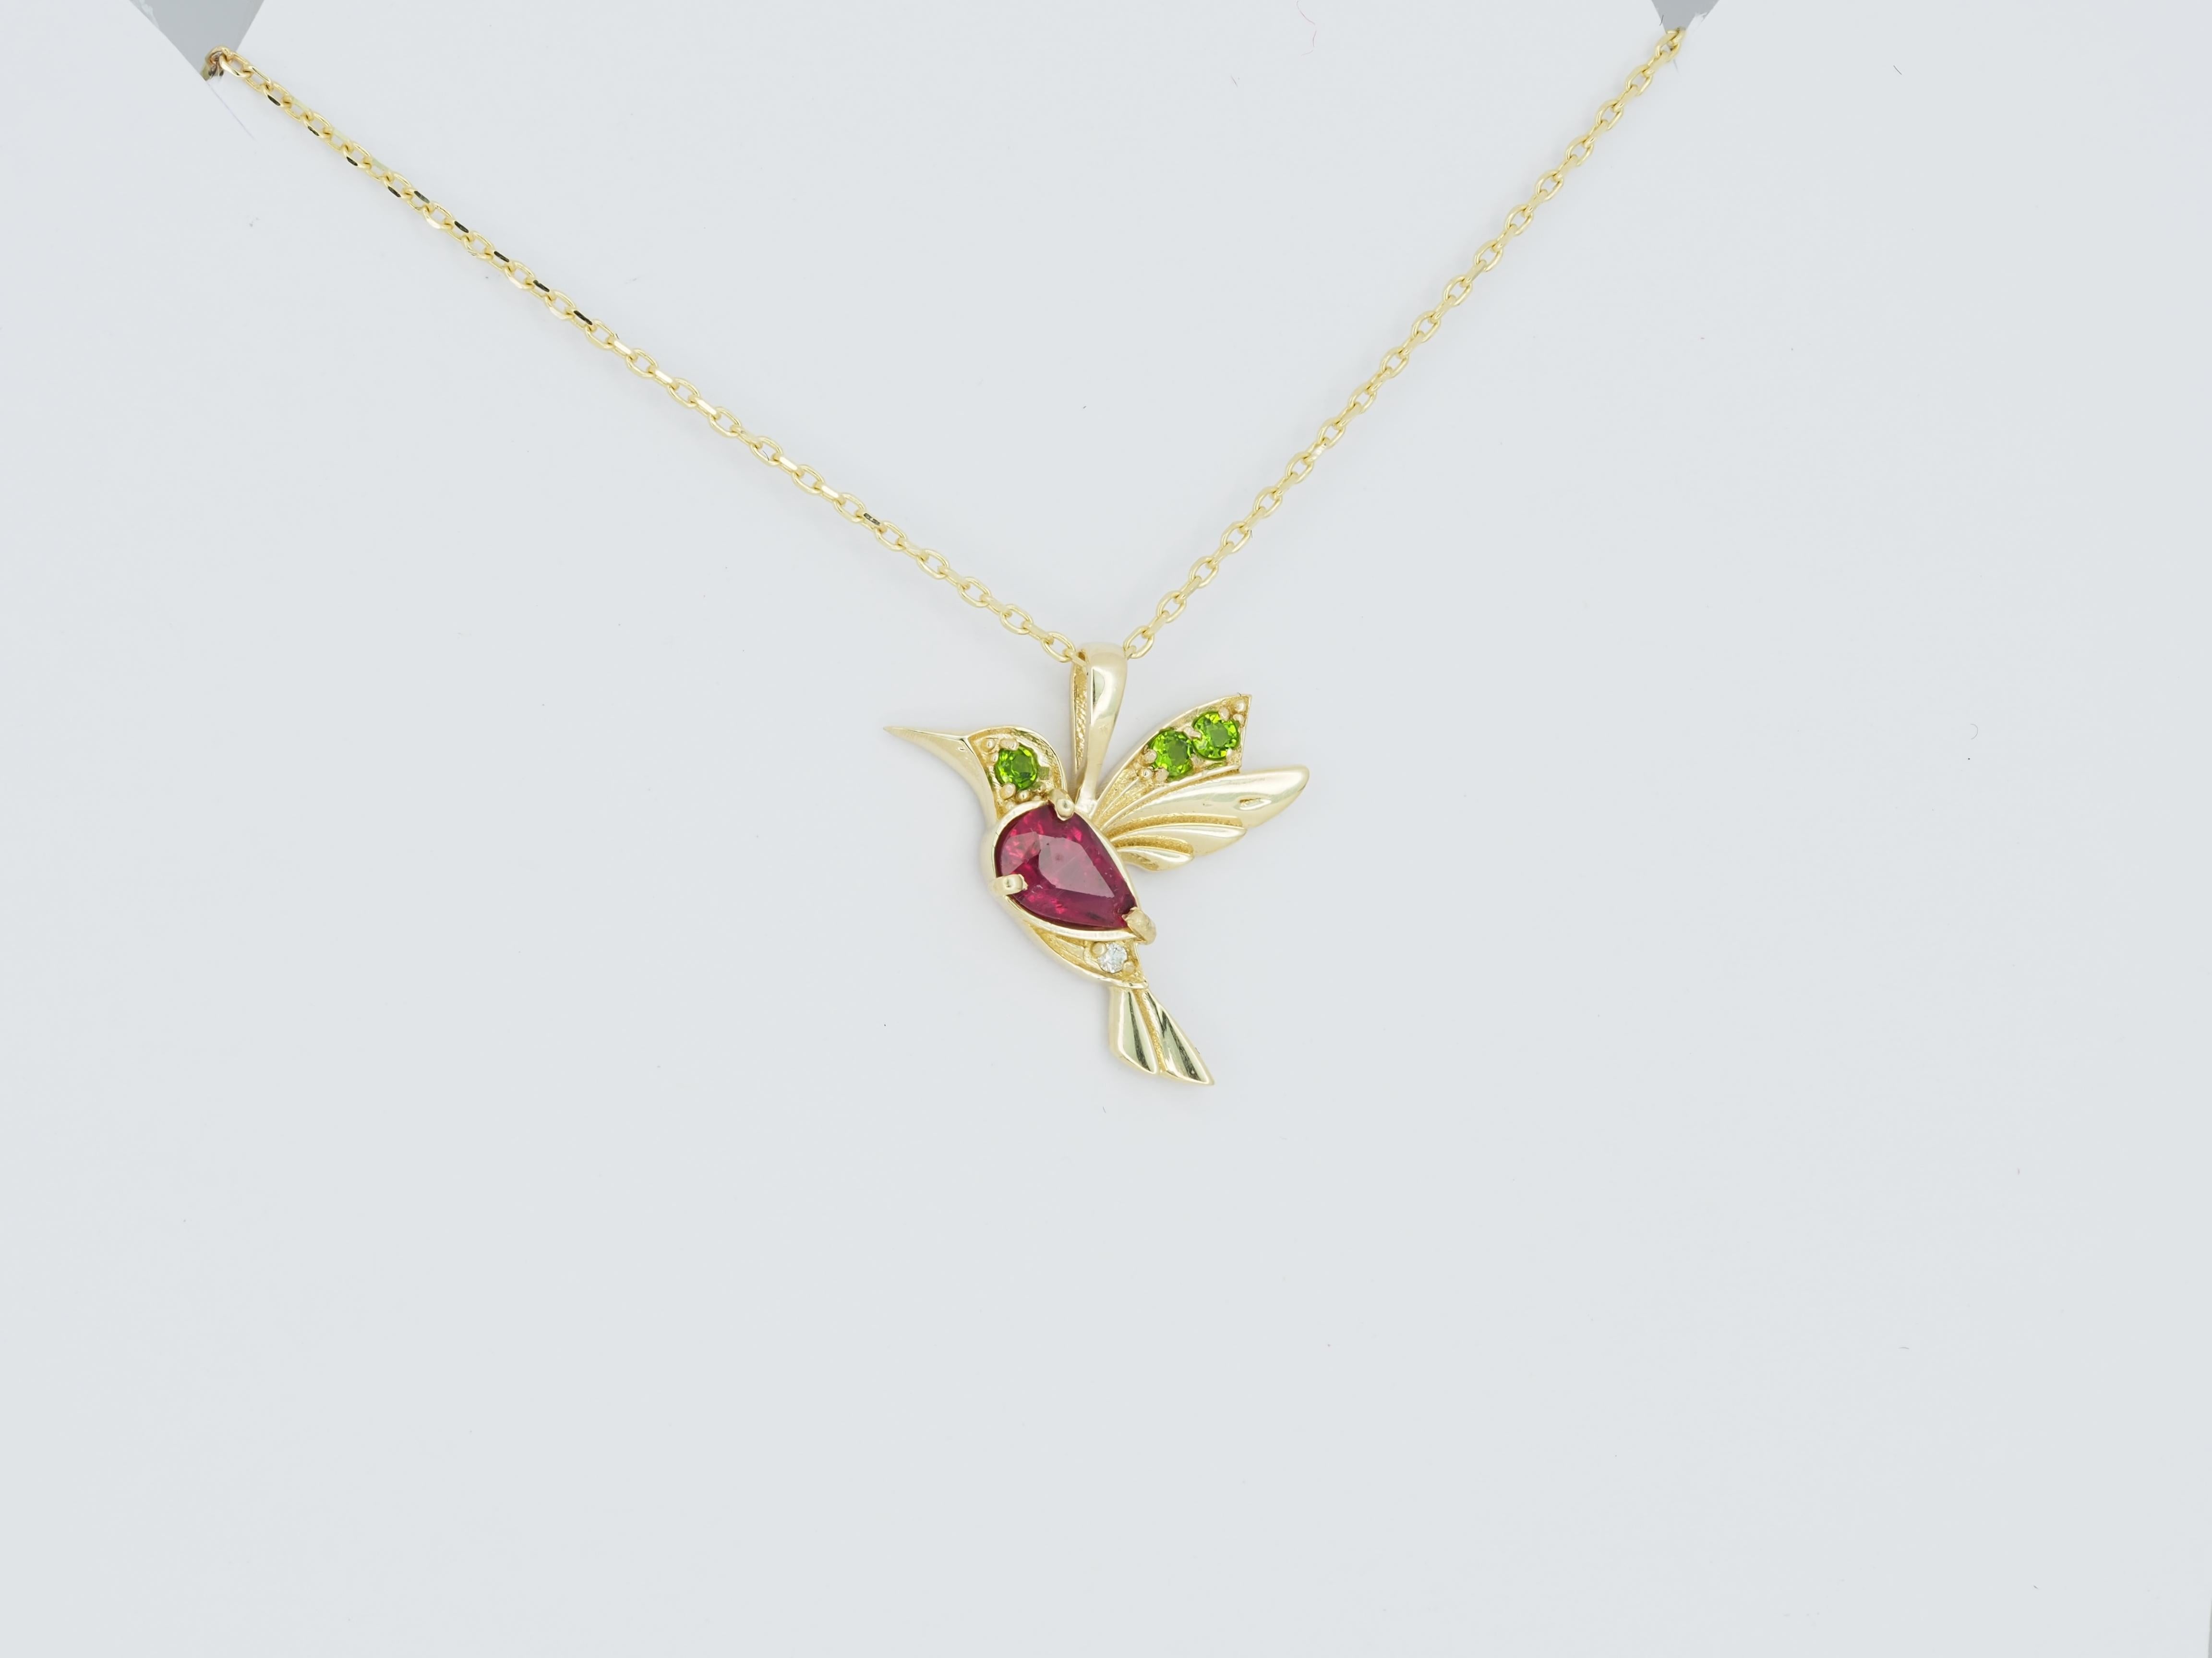 14k Gold Hummingbird Pendant with Rubies, Bird Pendant with Colored Gemstones For Sale 3